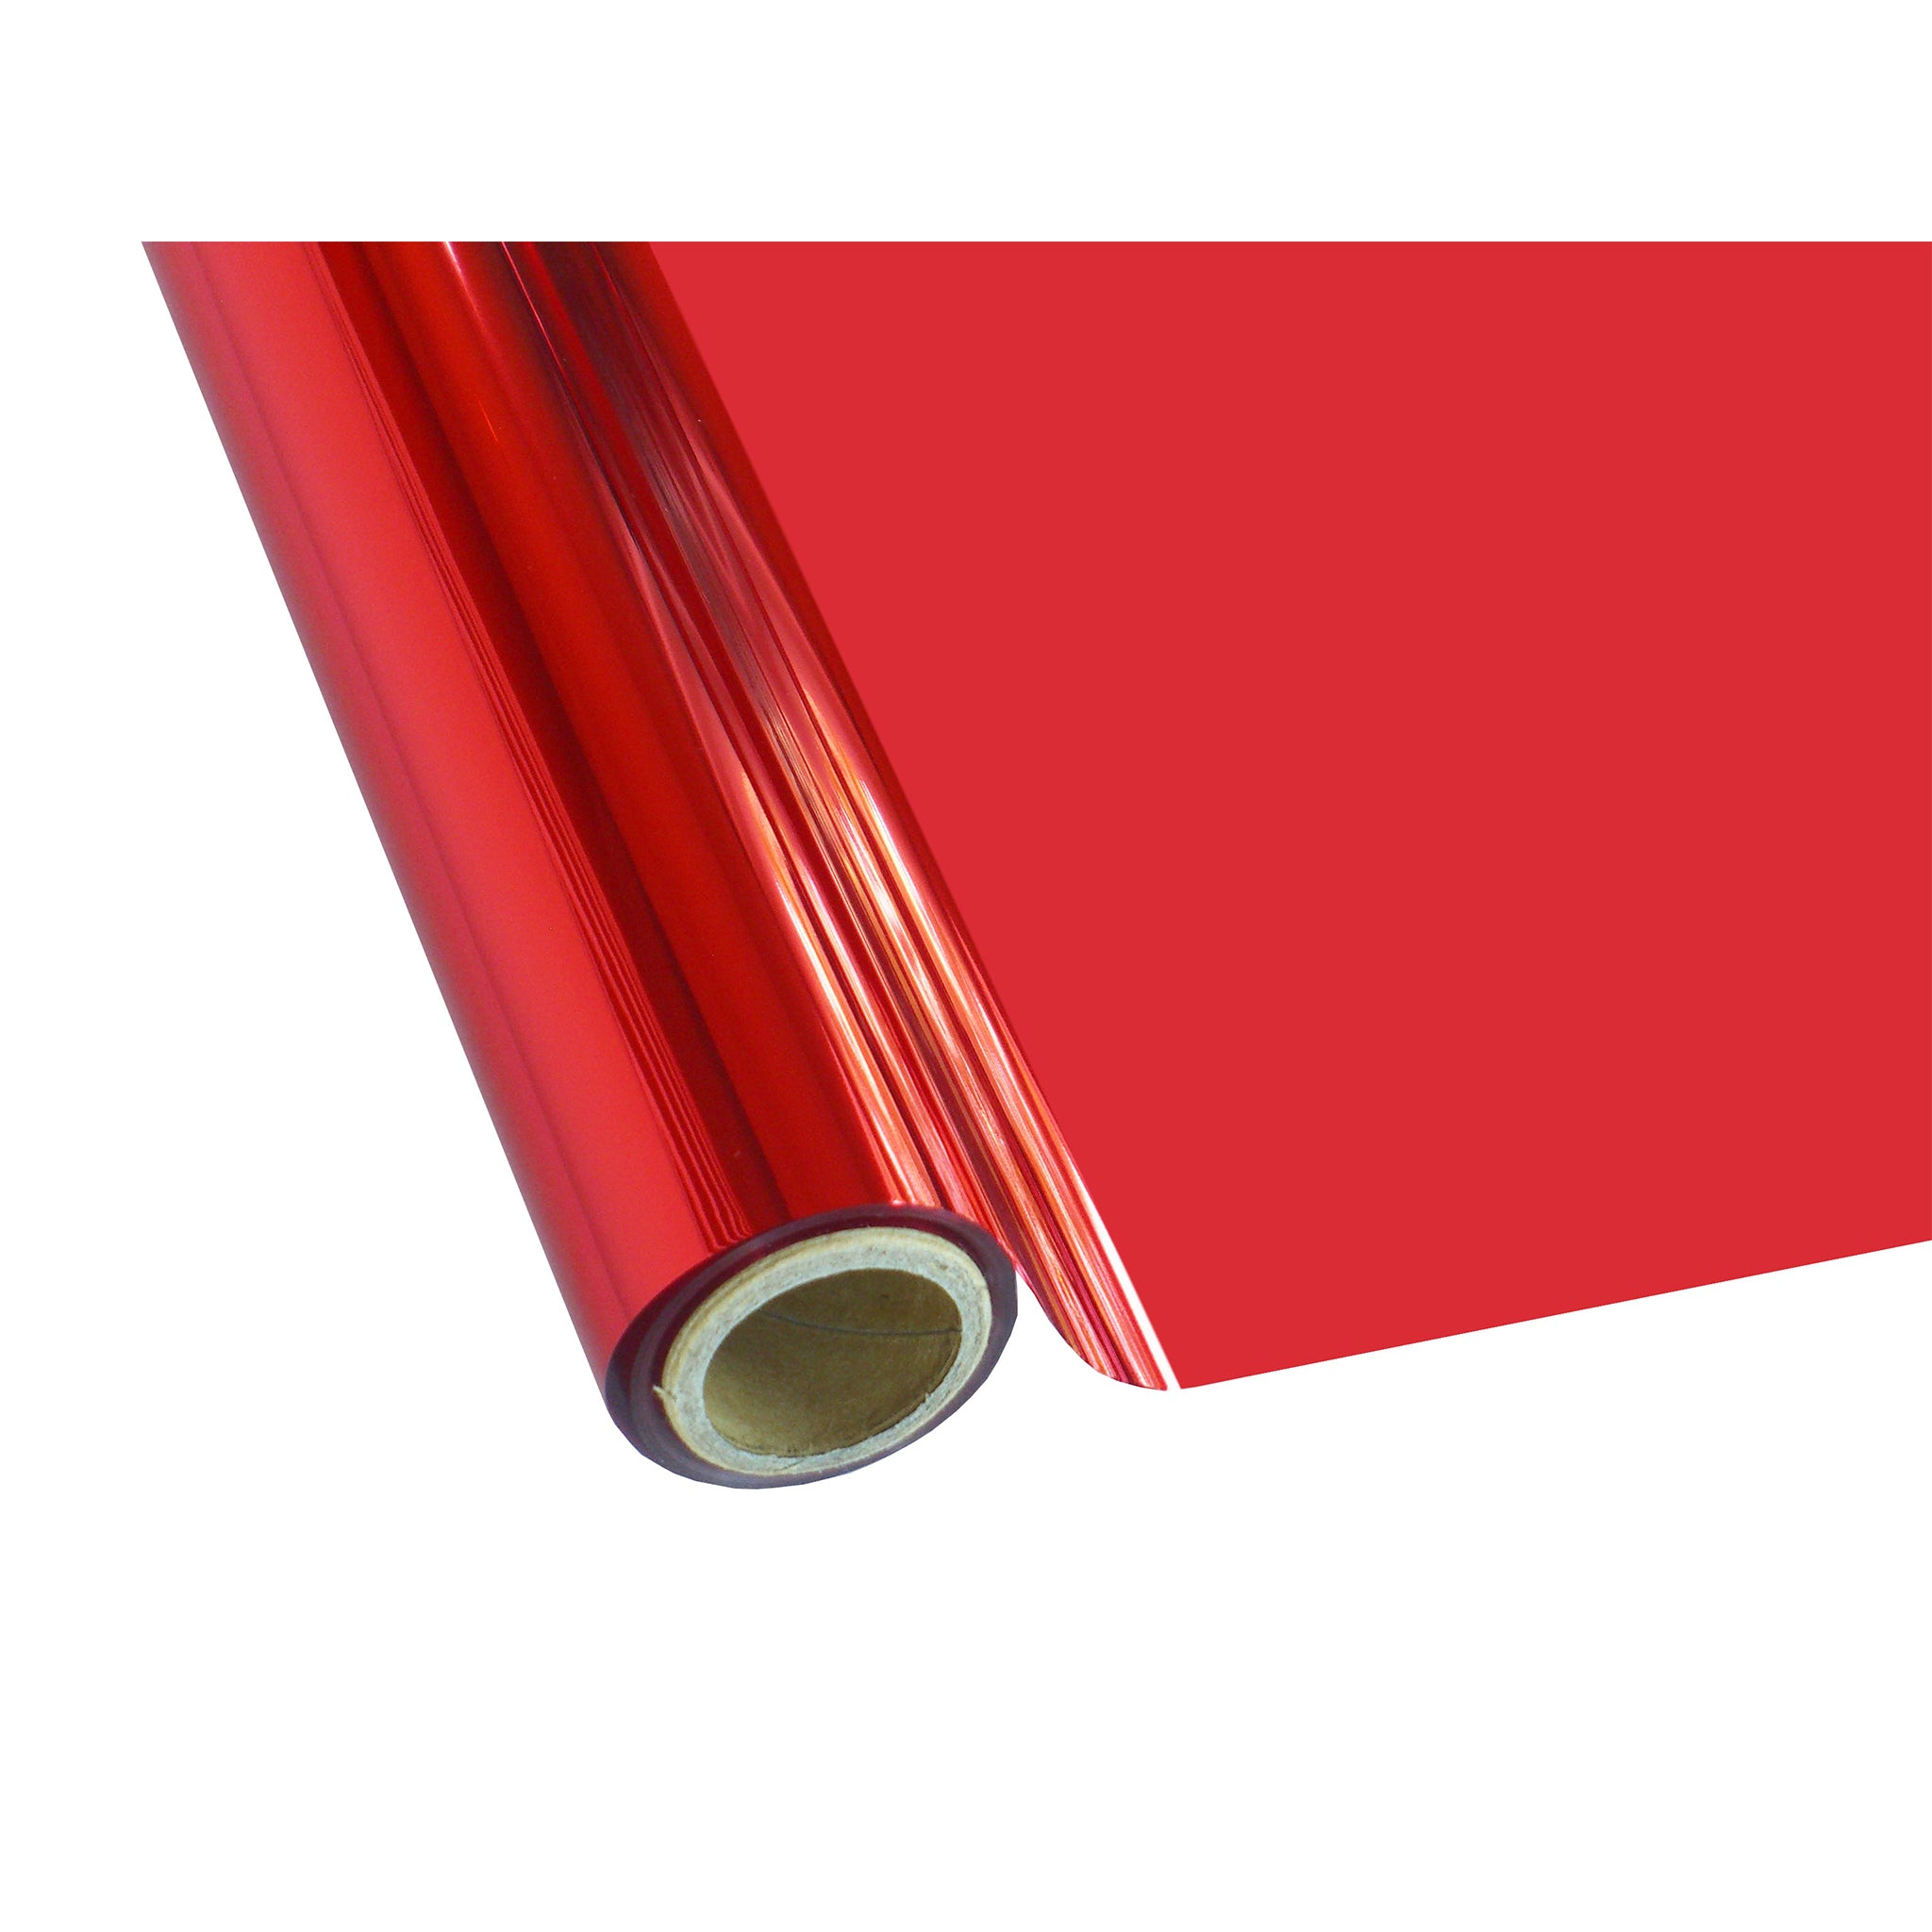 25 Foot Roll of 12" StarCraft Electra Foil - Red